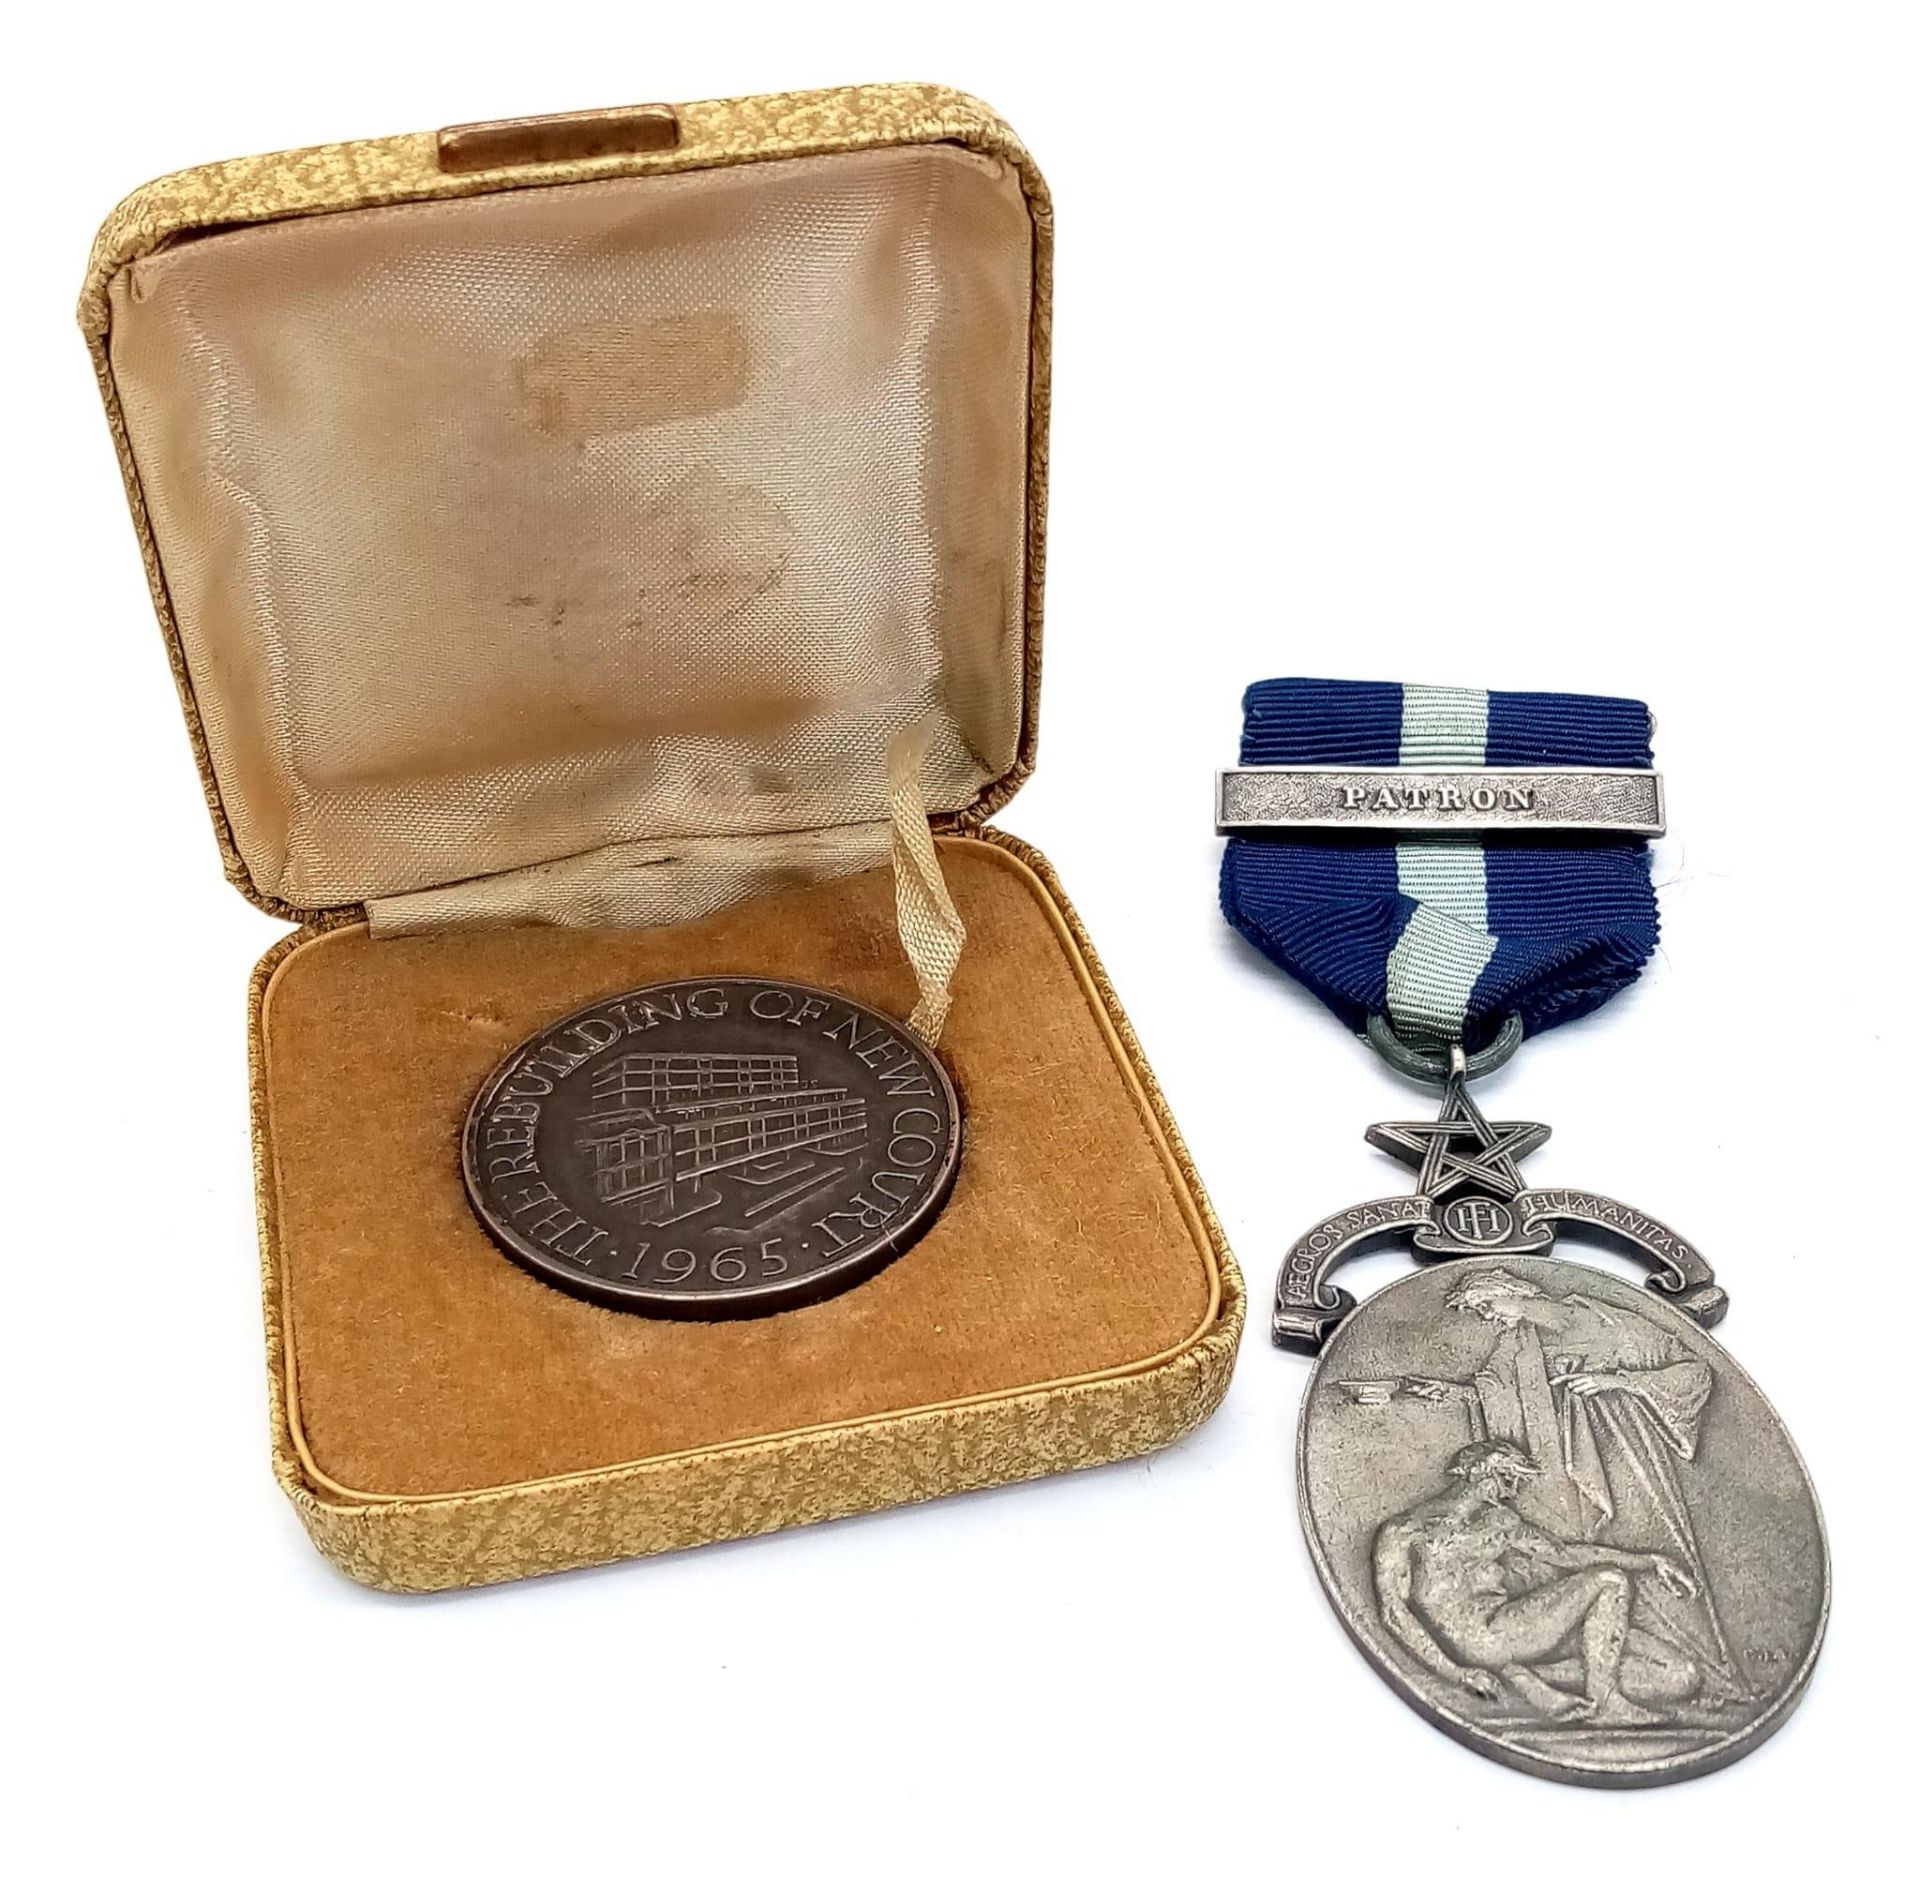 Two Vintage Medals Comprising 1) a Masonic Hospital Medal with Ribbon and Bar and 2) A Scarce 1965